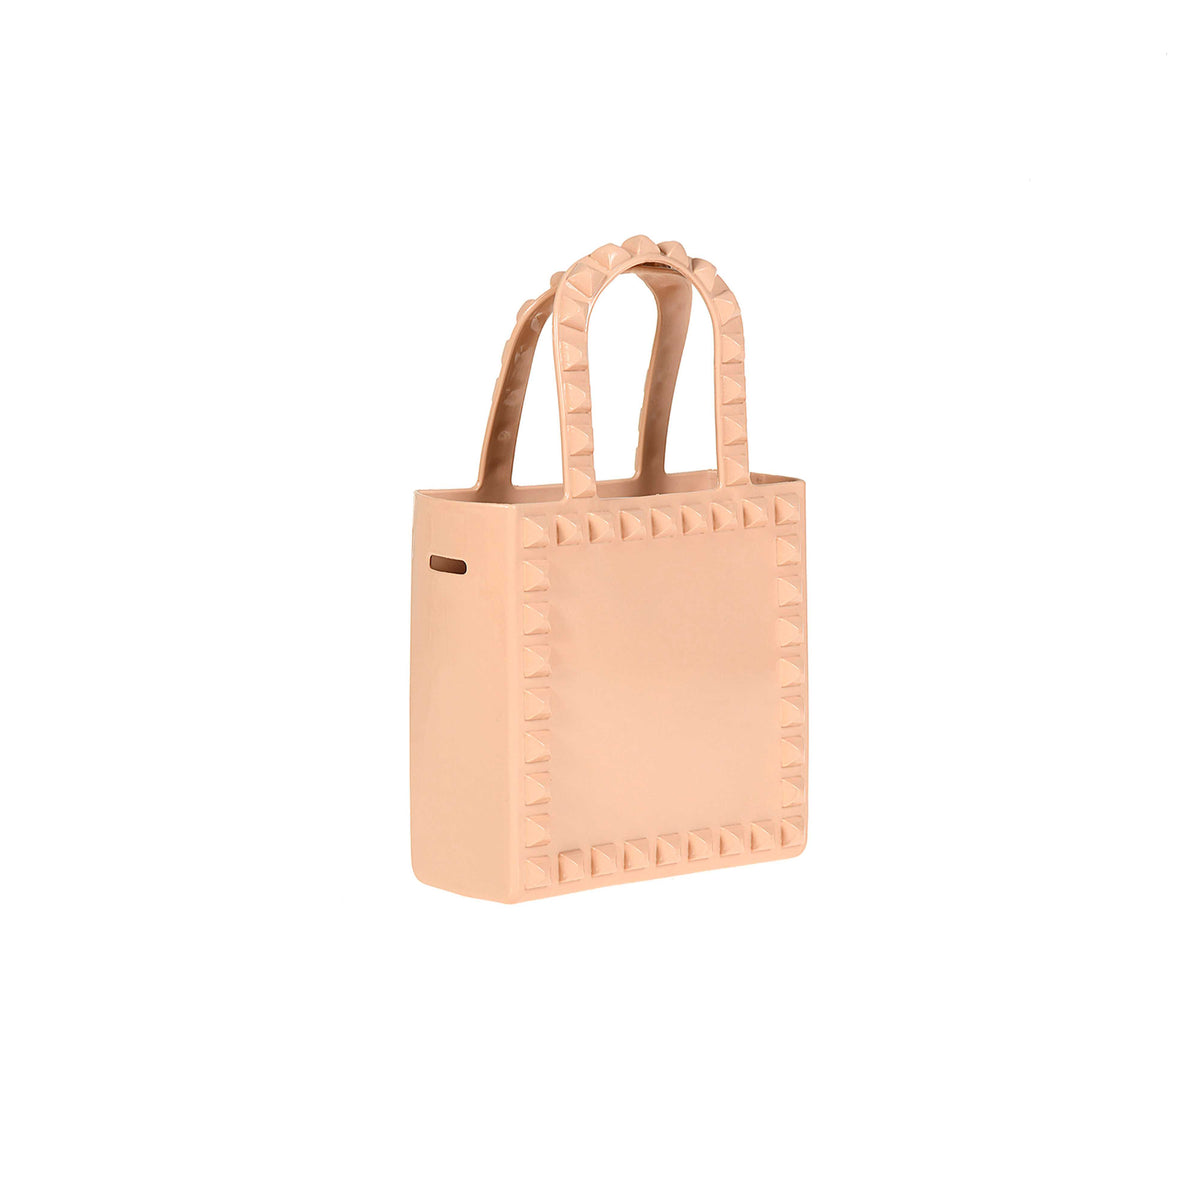 Studded jelly purse in Blush for the kids